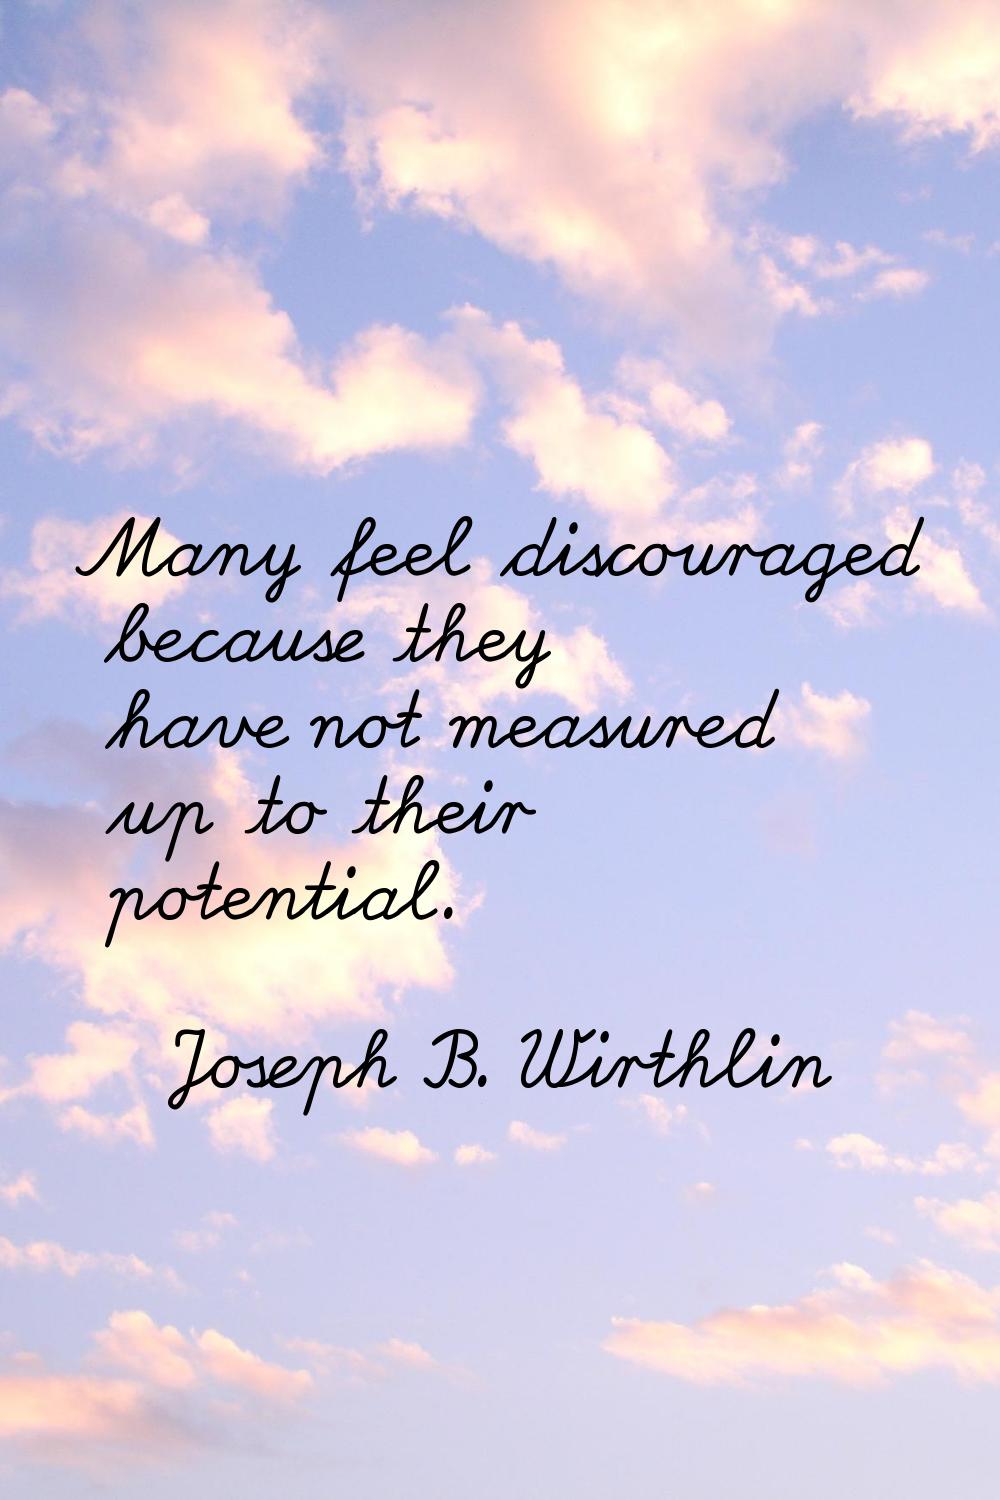 Many feel discouraged because they have not measured up to their potential.